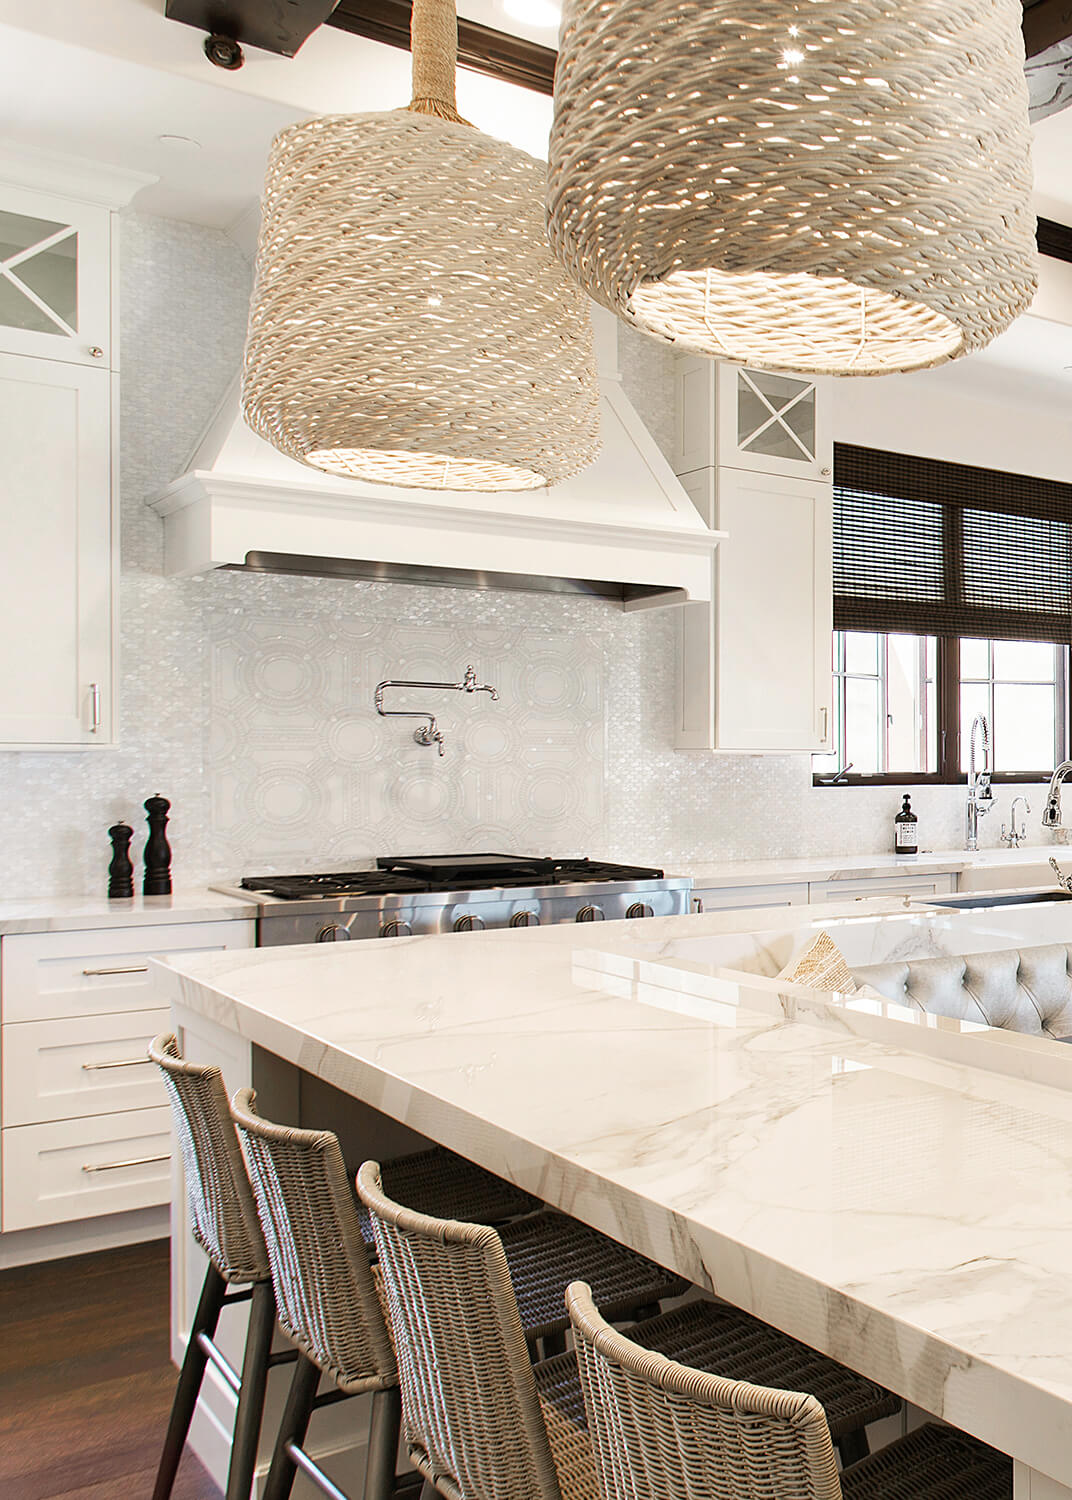 A bright, white and coastal styled kitchen design.